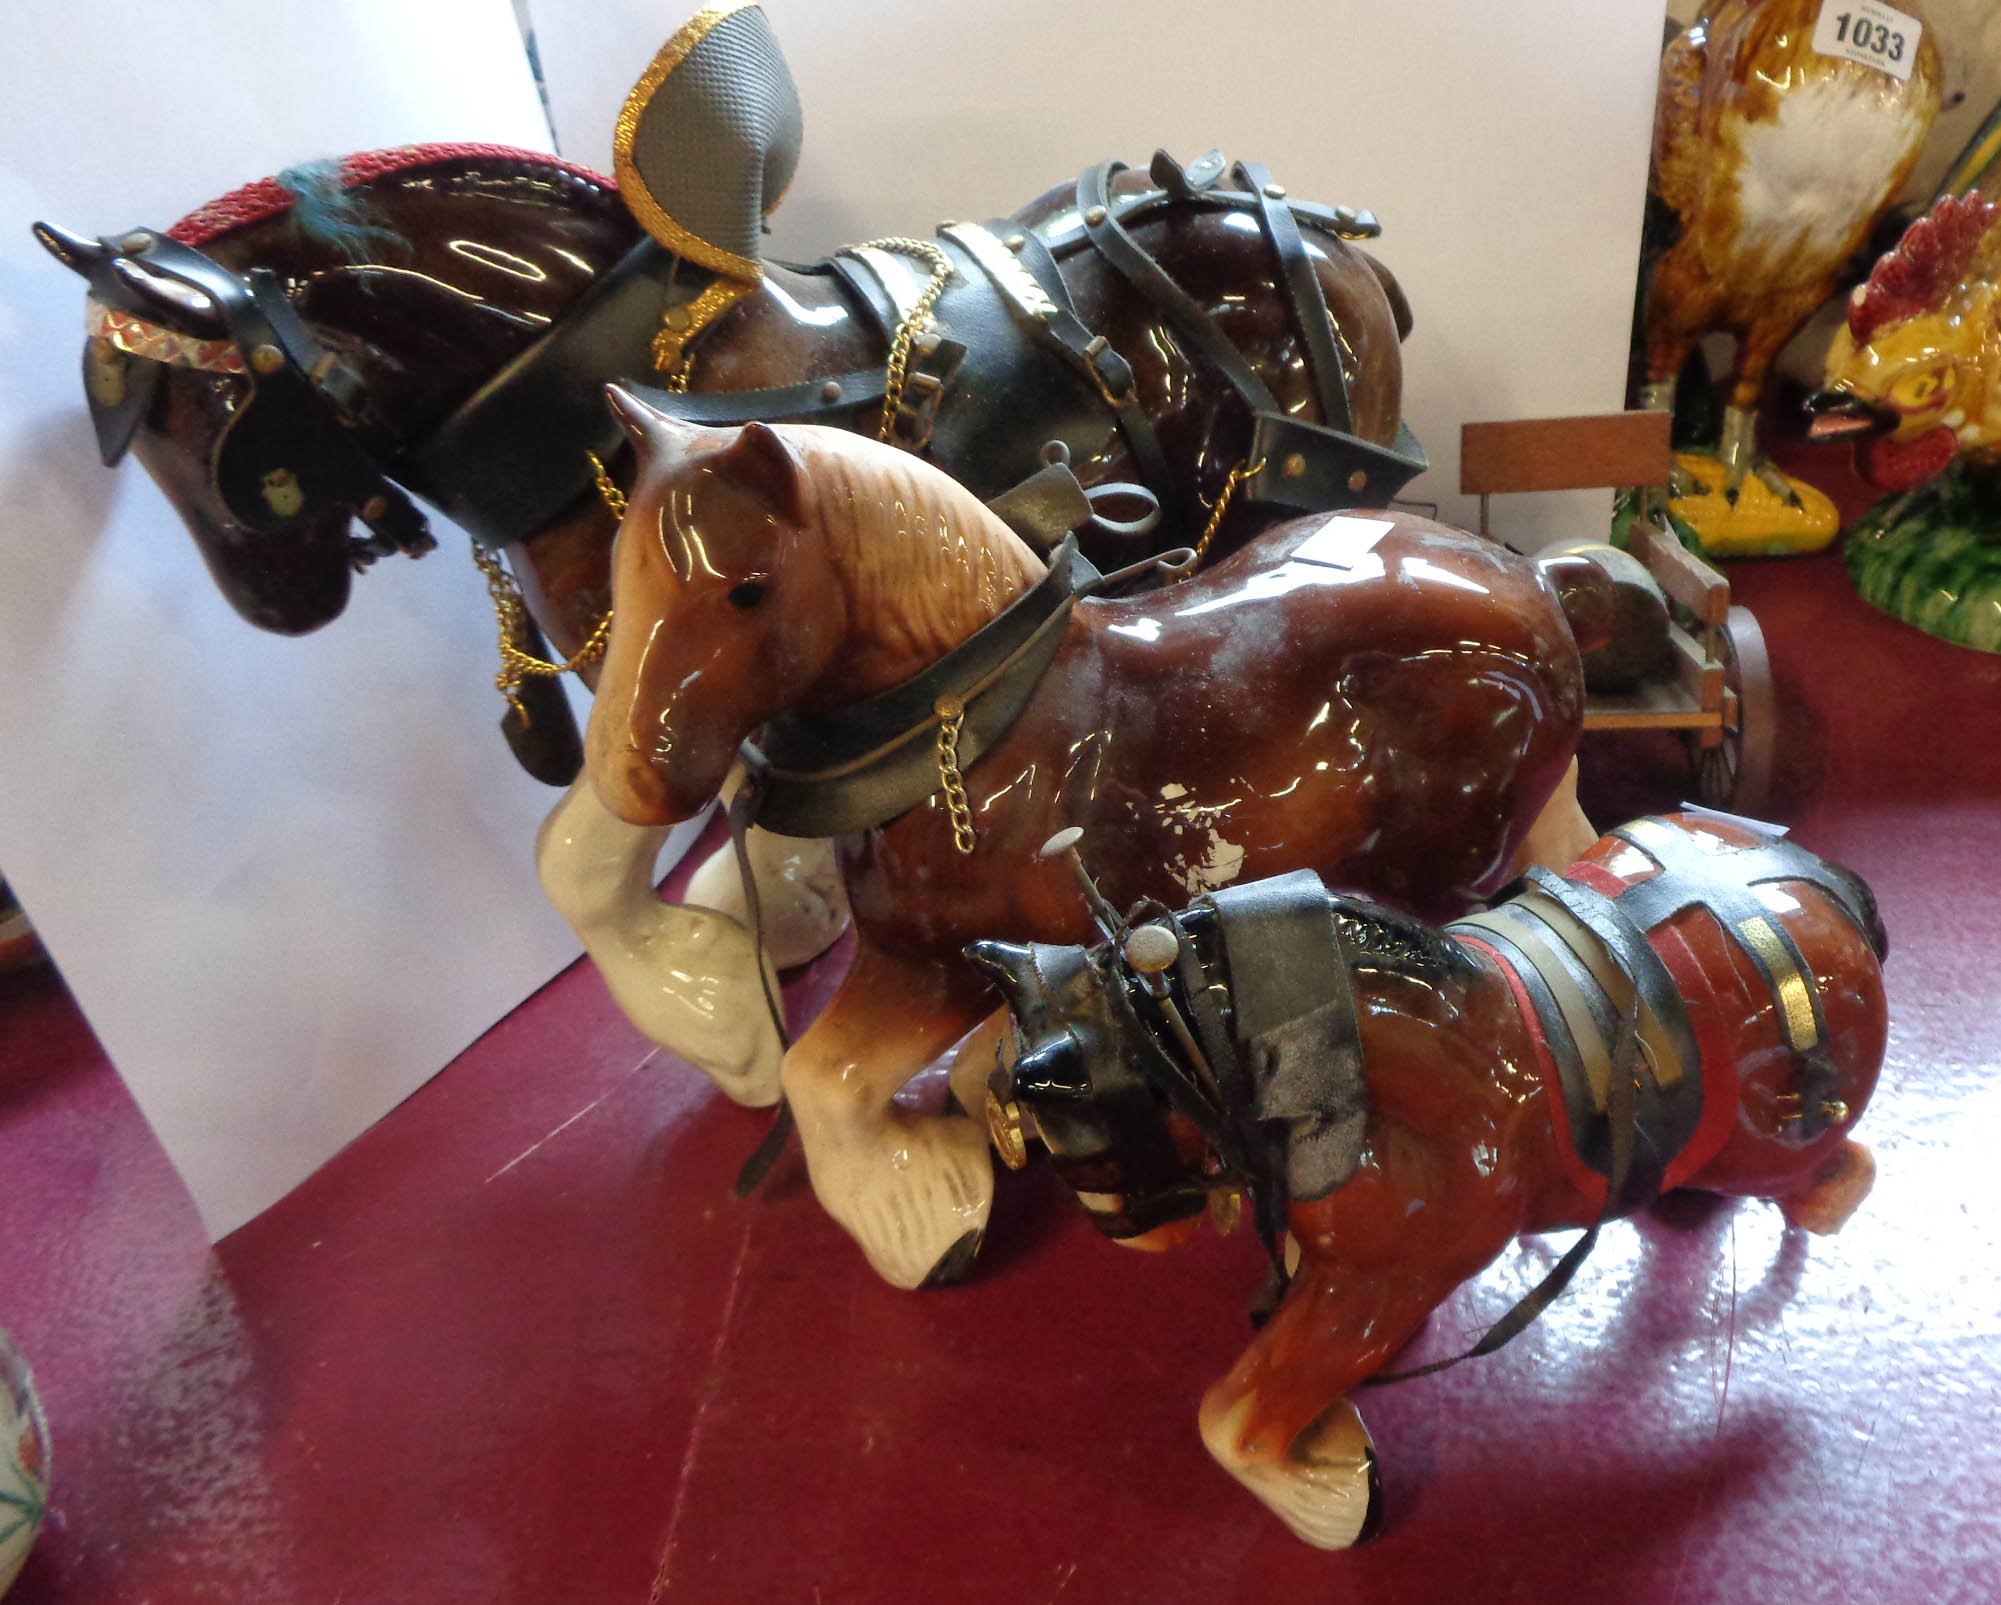 Three ceramic cart horse models of various size - sold with two associated wooden carts